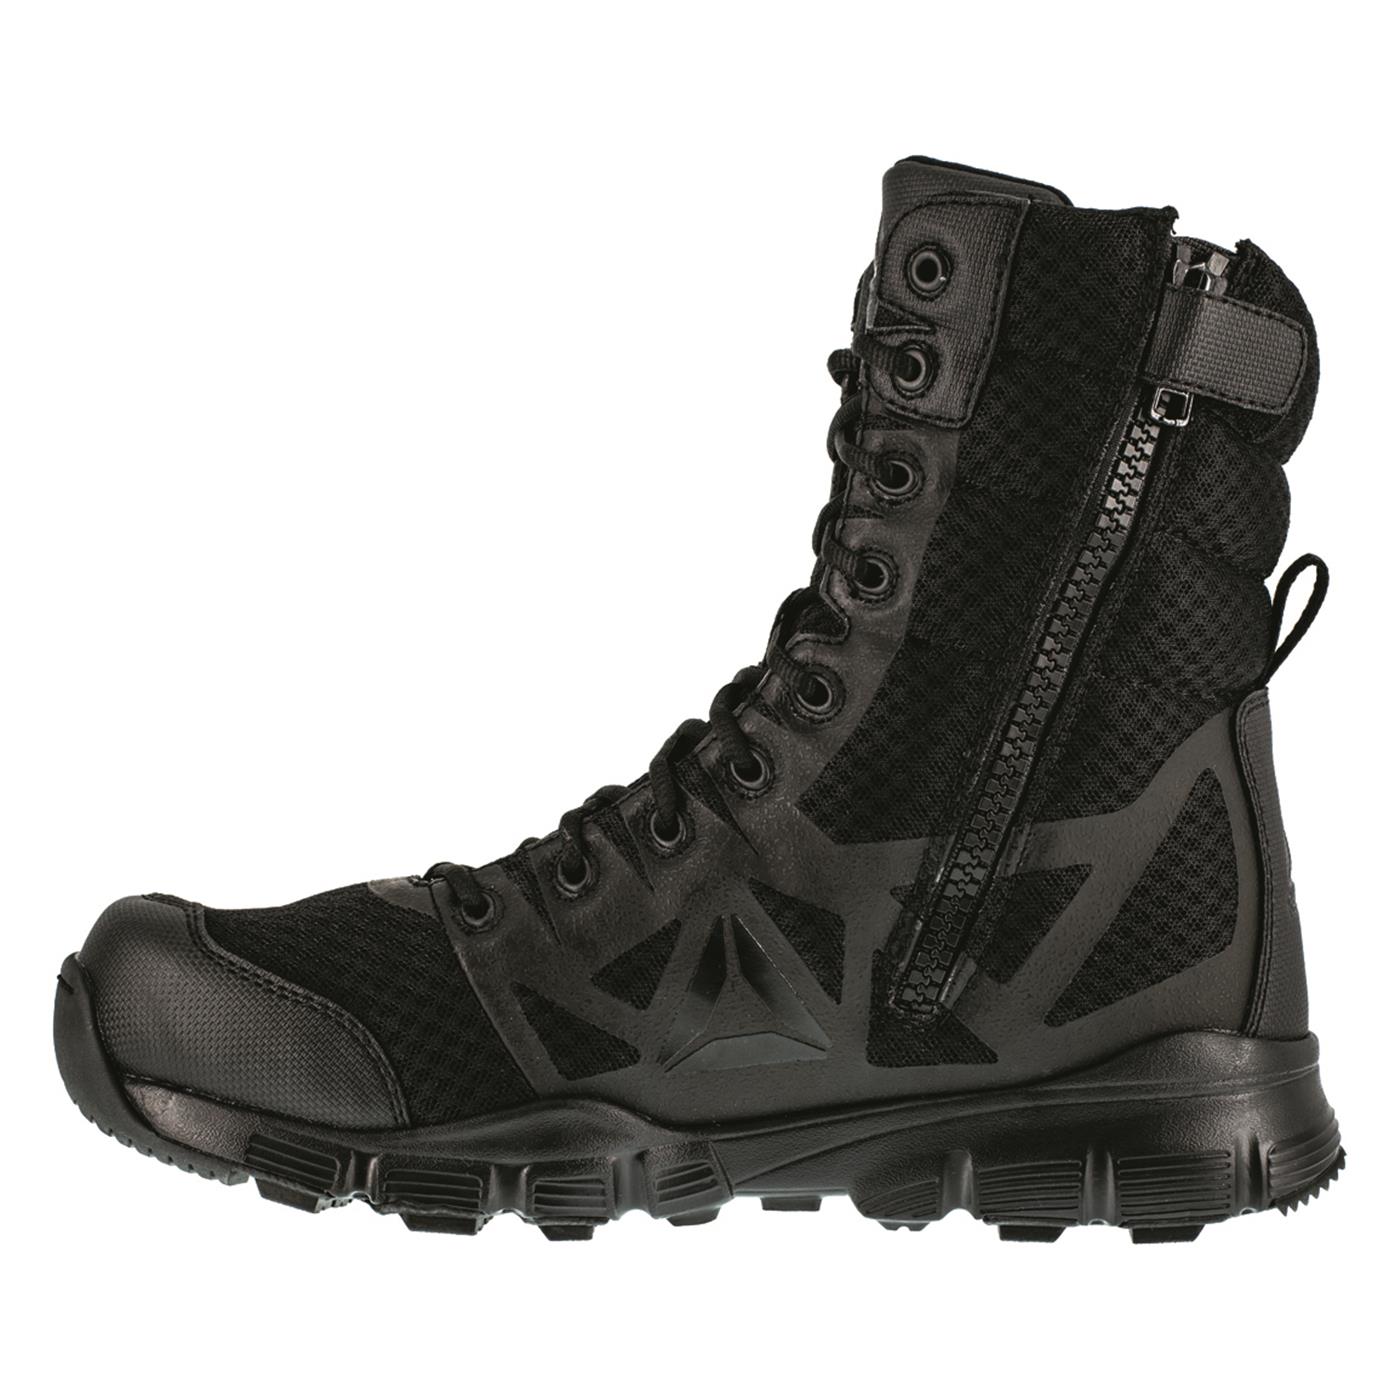 Reebok Work  Mens Dauntless Ultra-Light 8 Inch Side Zip   Work Safety Shoes Casual - image 3 of 5